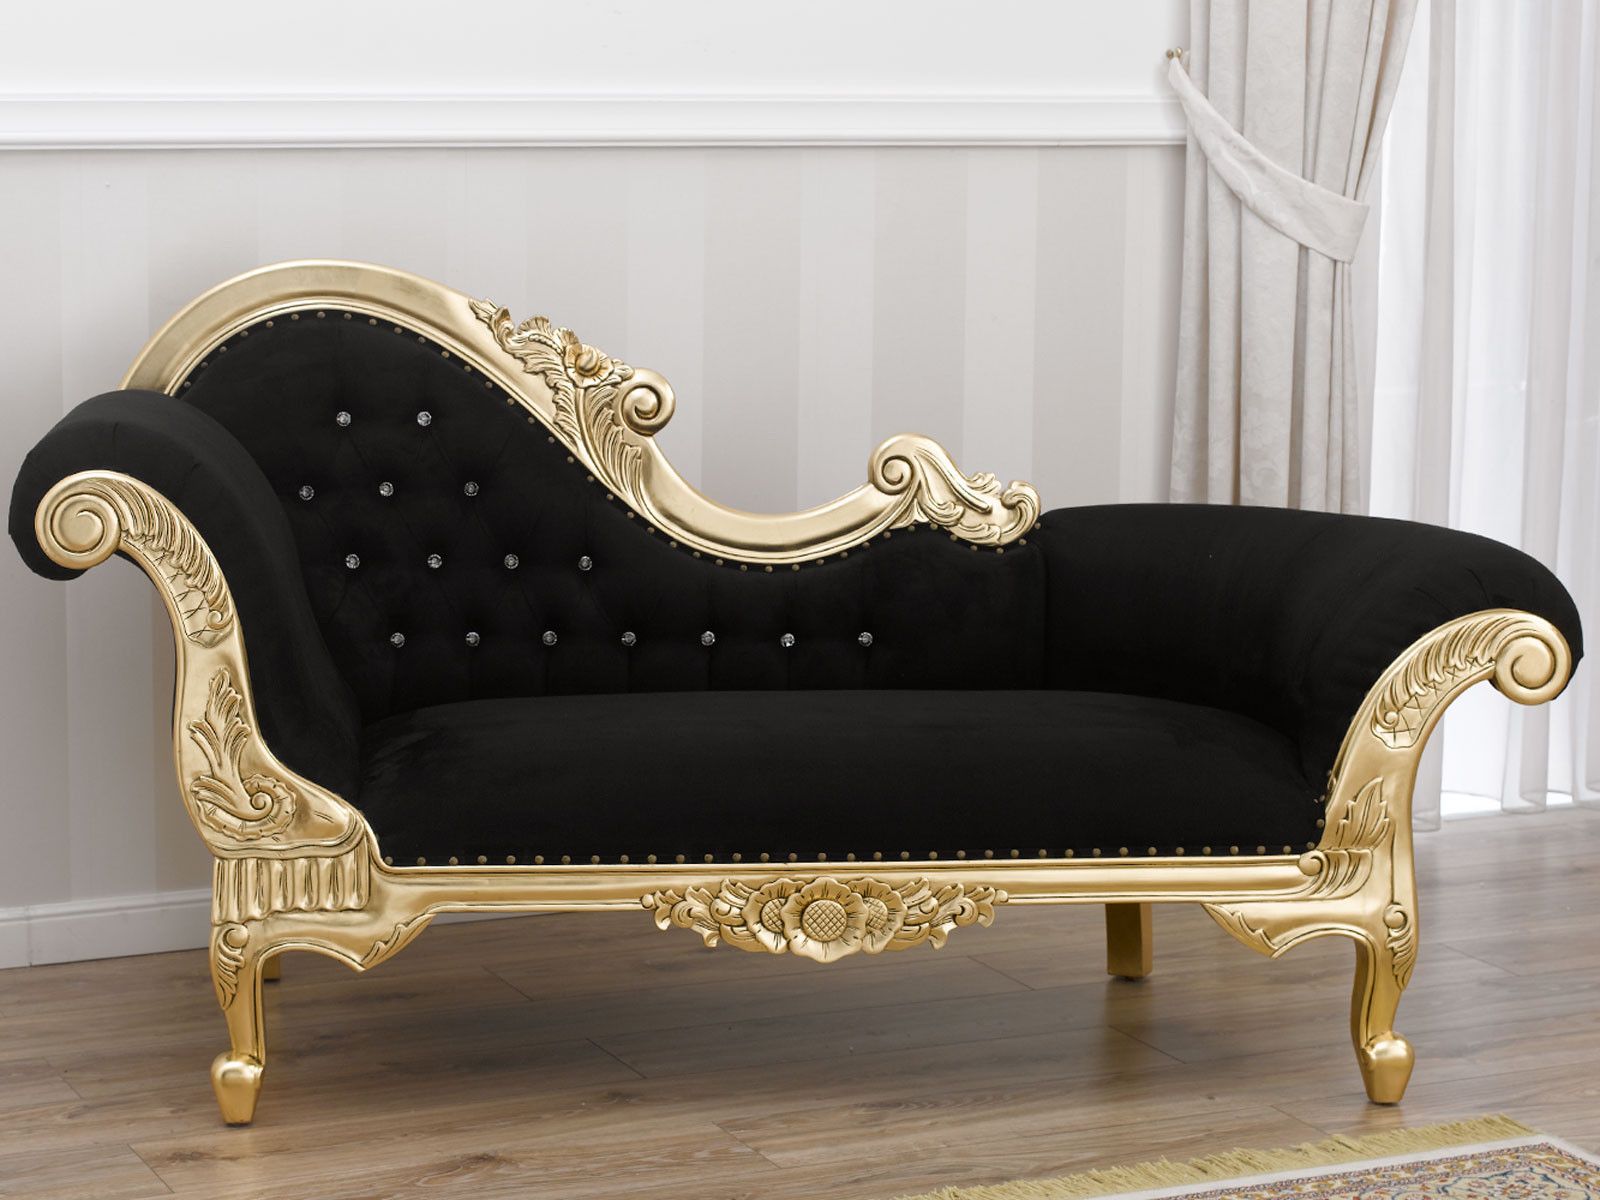 Chaise Longue Joana French Baroque Style Sofa Day Bed Gold Inside 4Pc French Seamed Sectional Sofas Velvet Black (View 4 of 15)